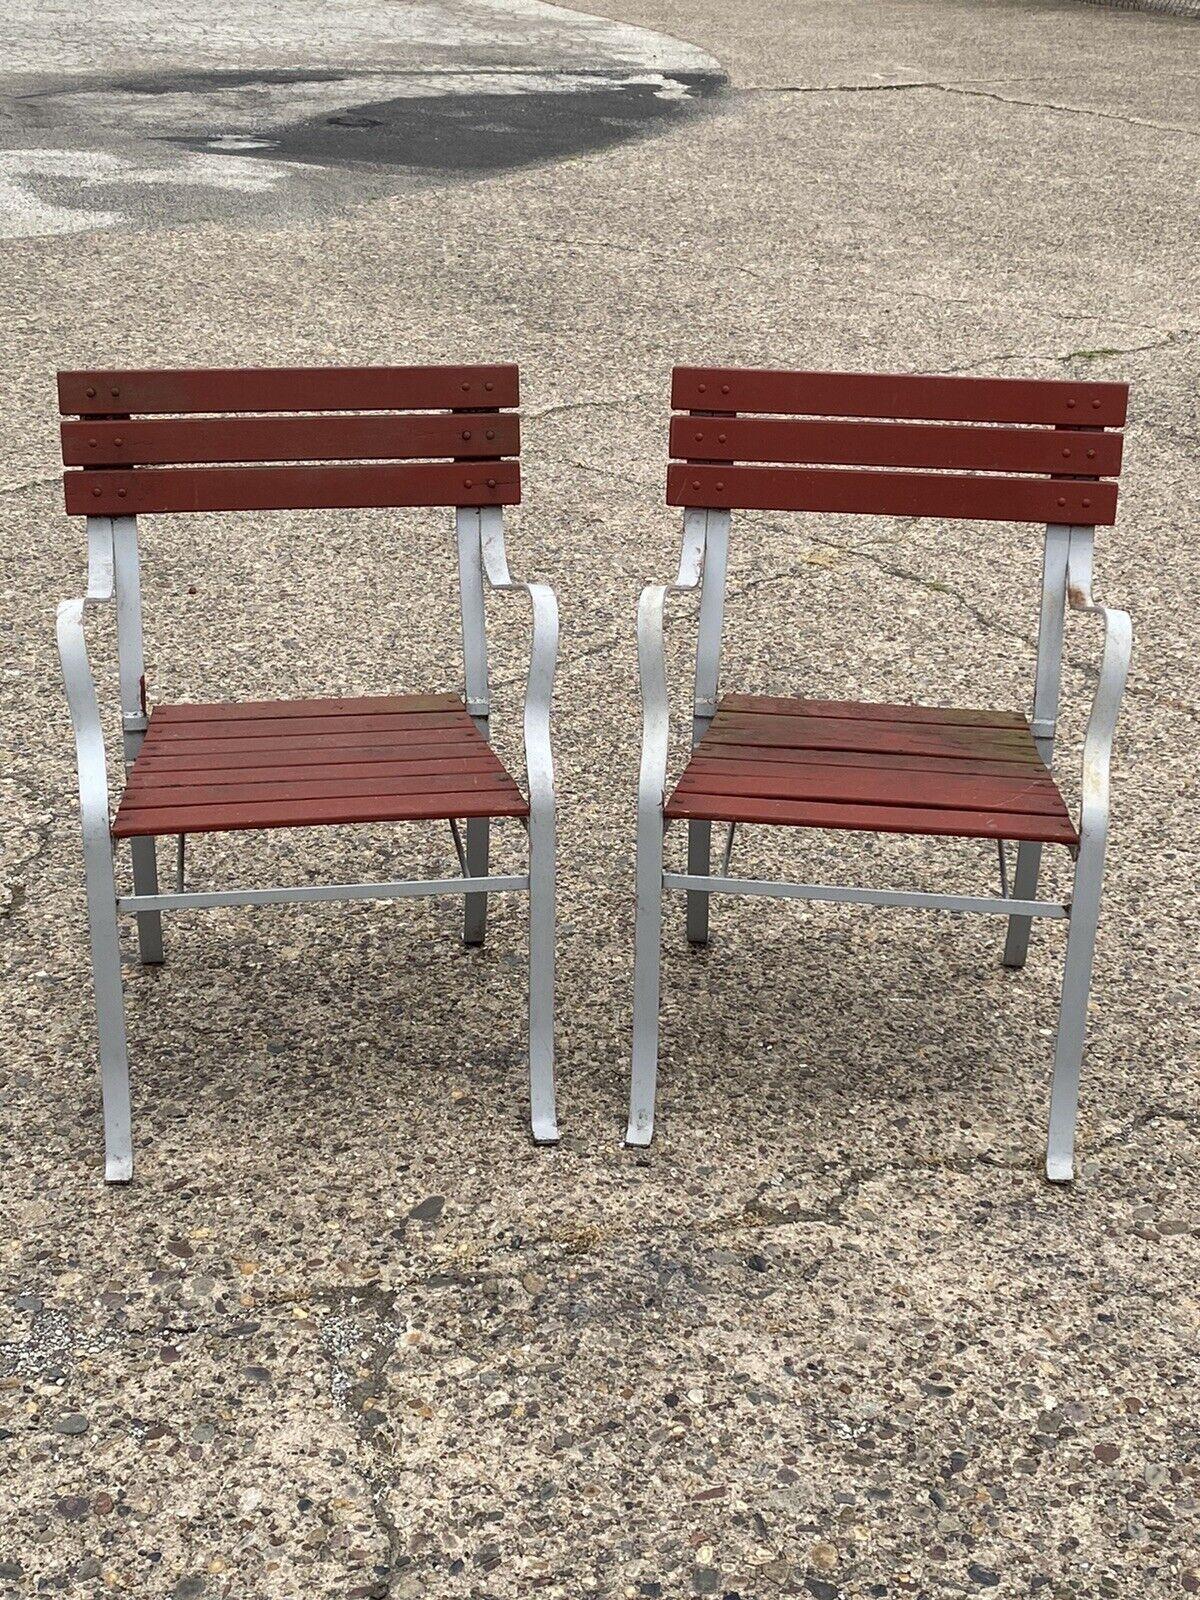 Vintage wrought iron and wood slat French style garden outdoor chairs - a pair. *Price is for (1) pair. Currently (3) pairs available*. Item features wooden slat back and seat, iron frame, red painted finish, original label, great style and form.